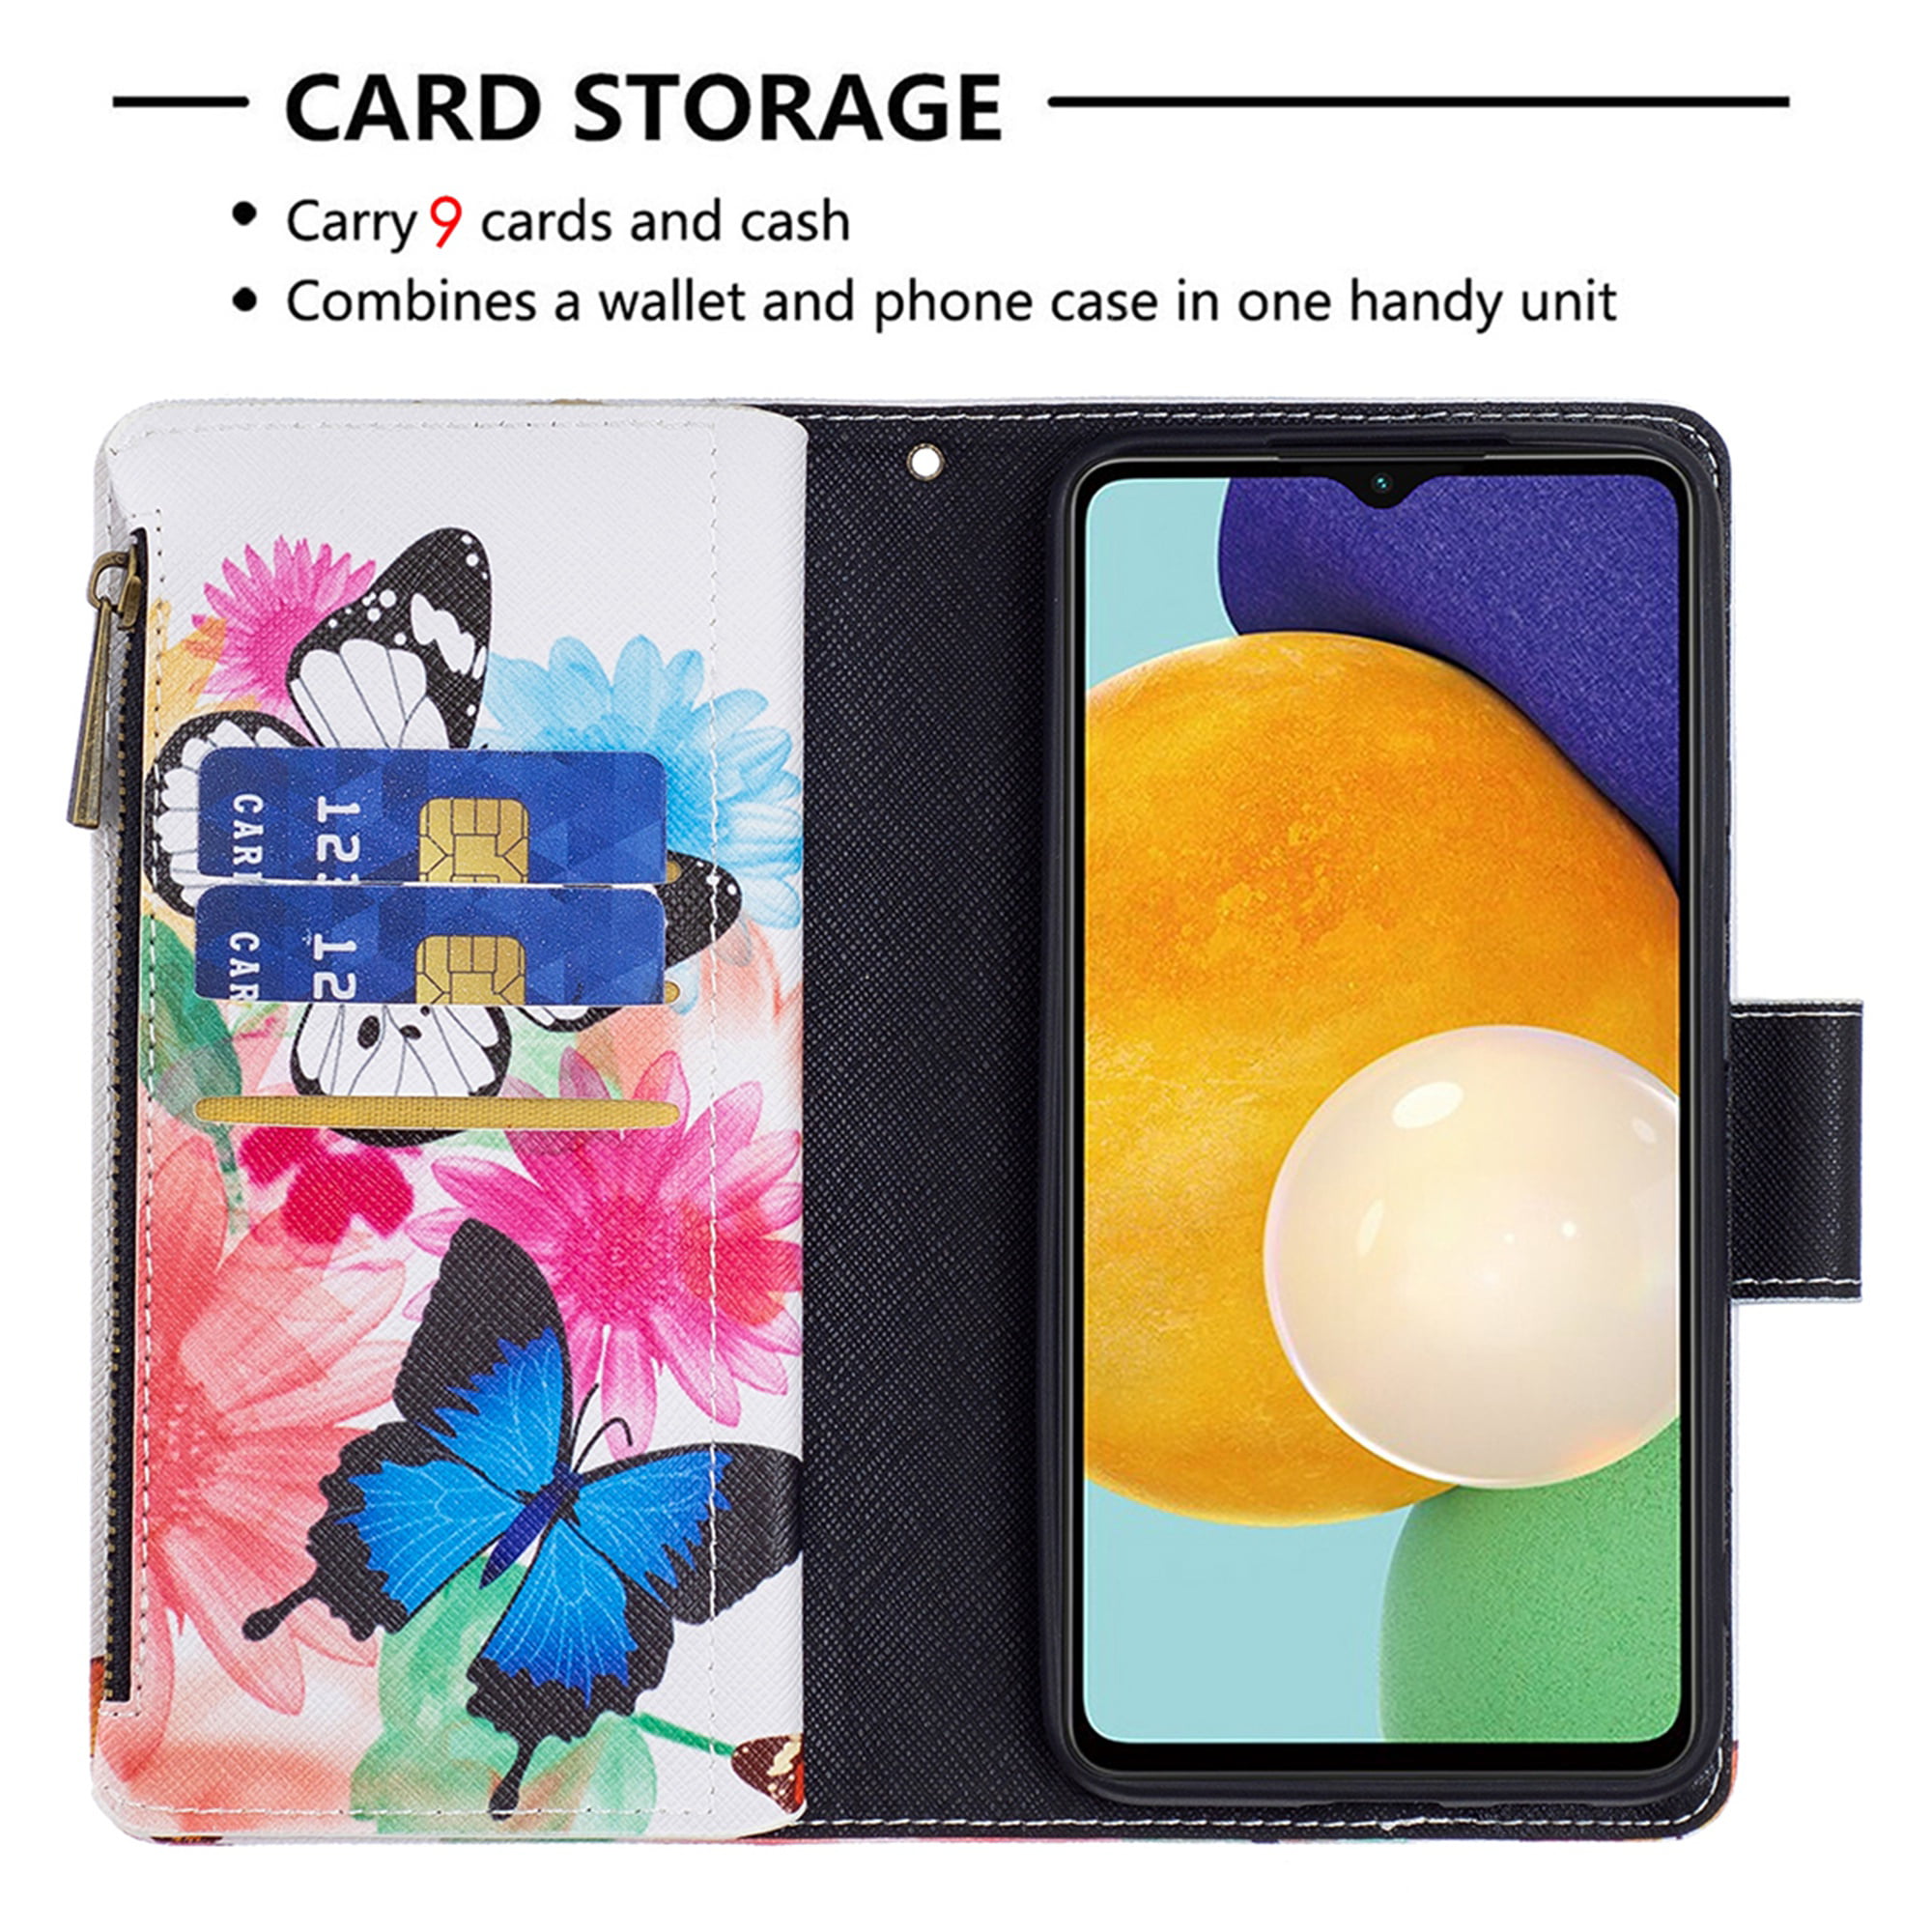  JYCUHTCL for Samsung Galaxy A53 Wallet Case with Card Holder  Double Magnetic Clasp Butterflies Purple Theme Phone Case for Galaxy A53 5G Case  Wallet Credit Cards Slot Shockproof Durable Cover 